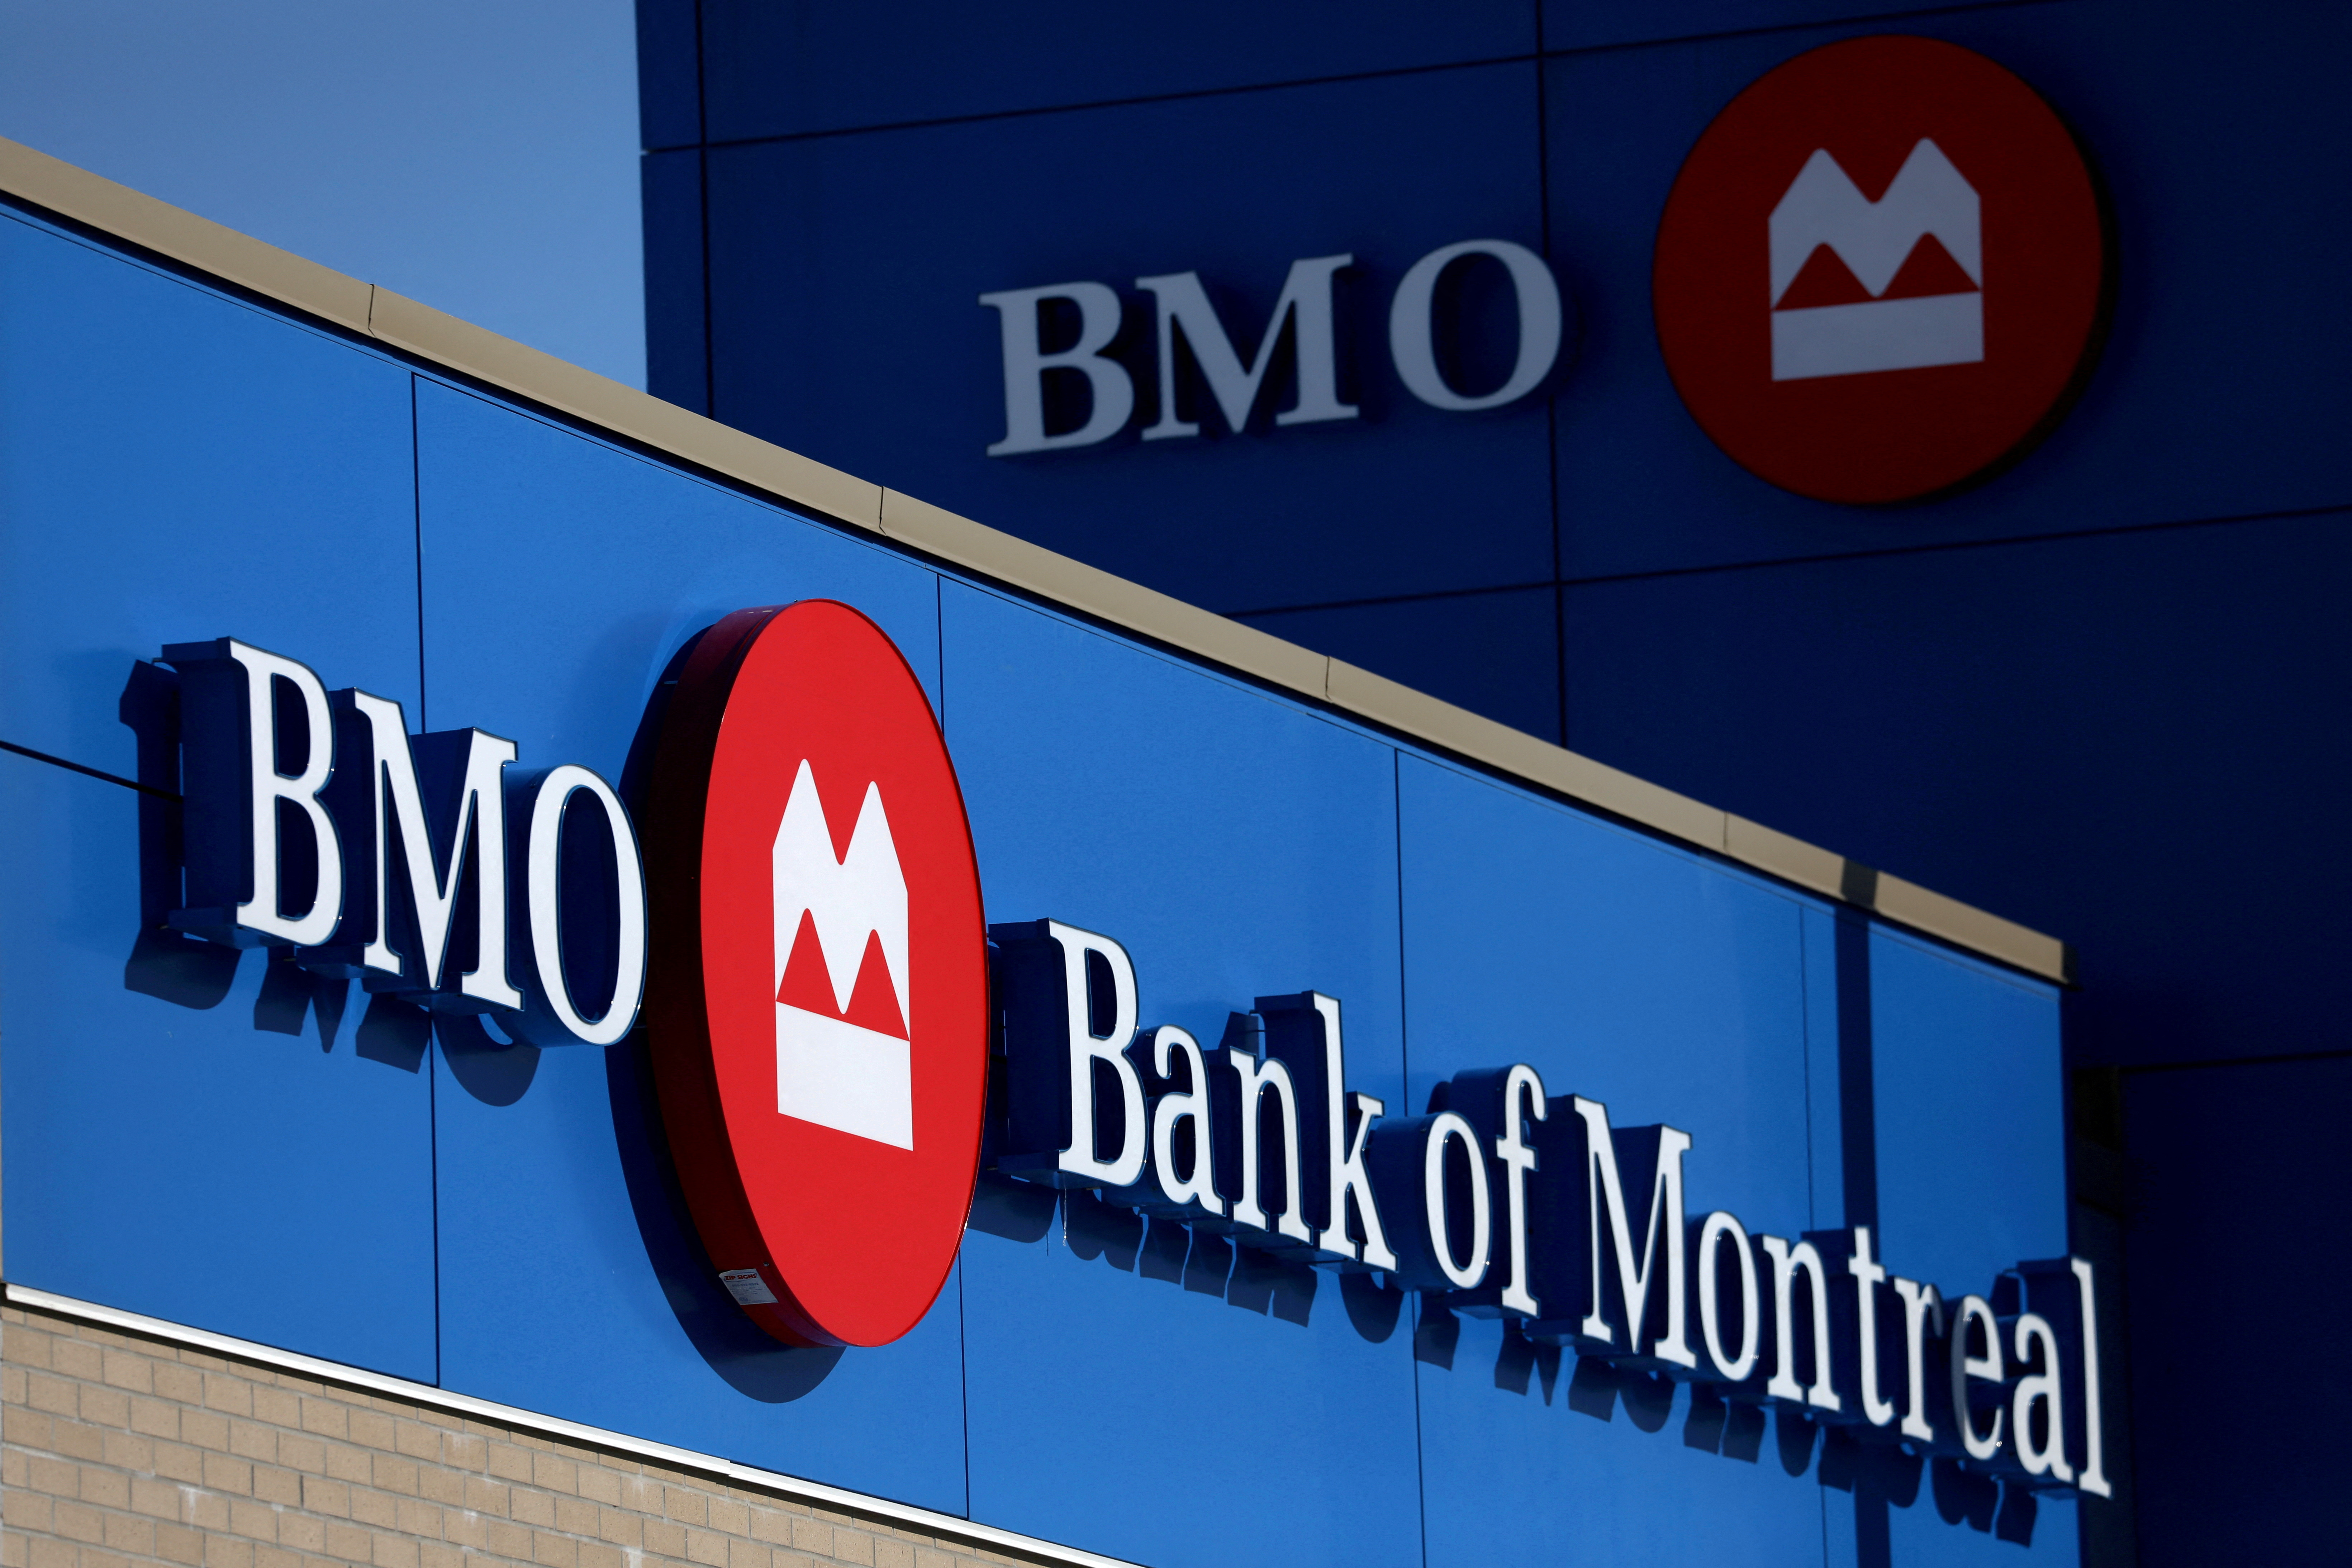  A Bank of Montreal logo is seen outside of a branch in Ottawa